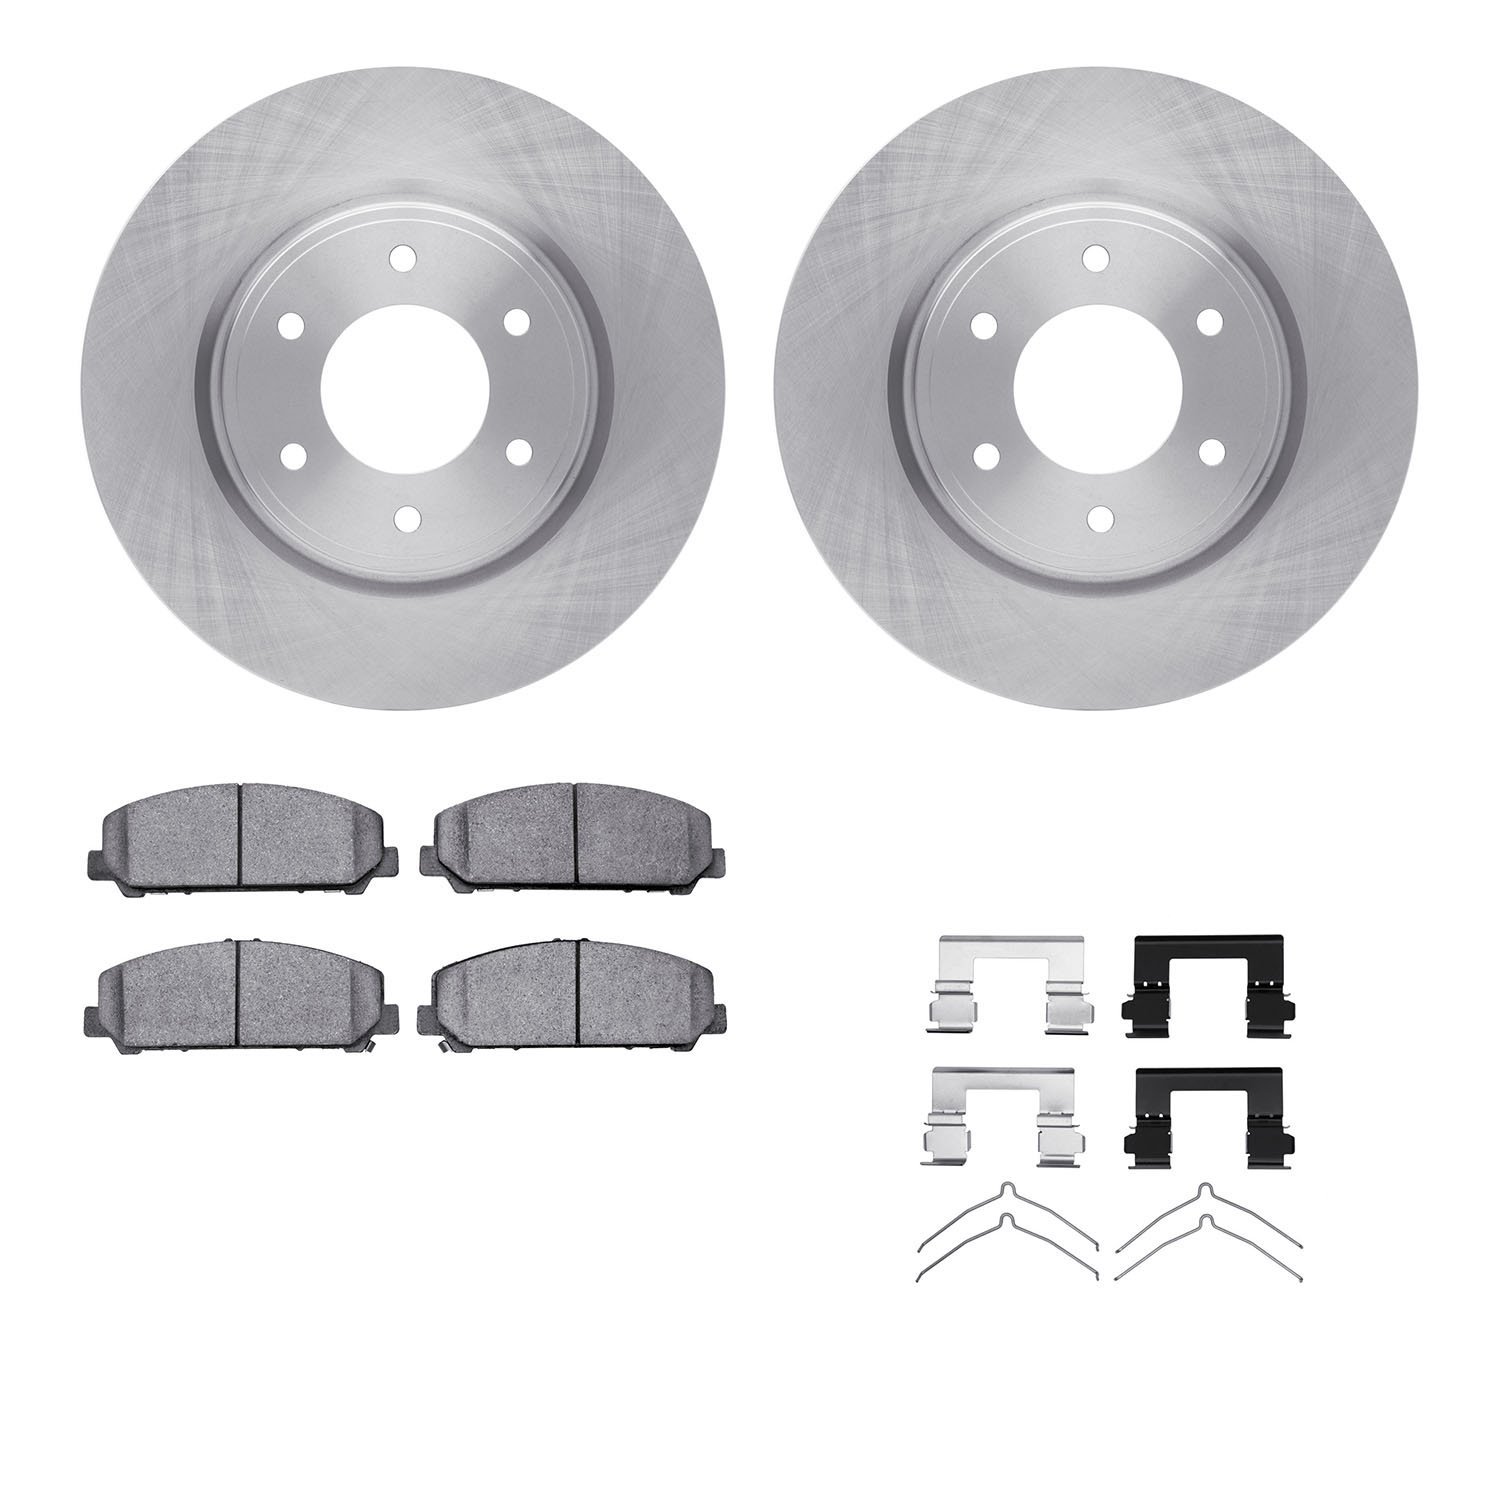 6412-67013 Brake Rotors with Ultimate-Duty Brake Pads Kit & Hardware, Fits Select Infiniti/Nissan, Position: Front